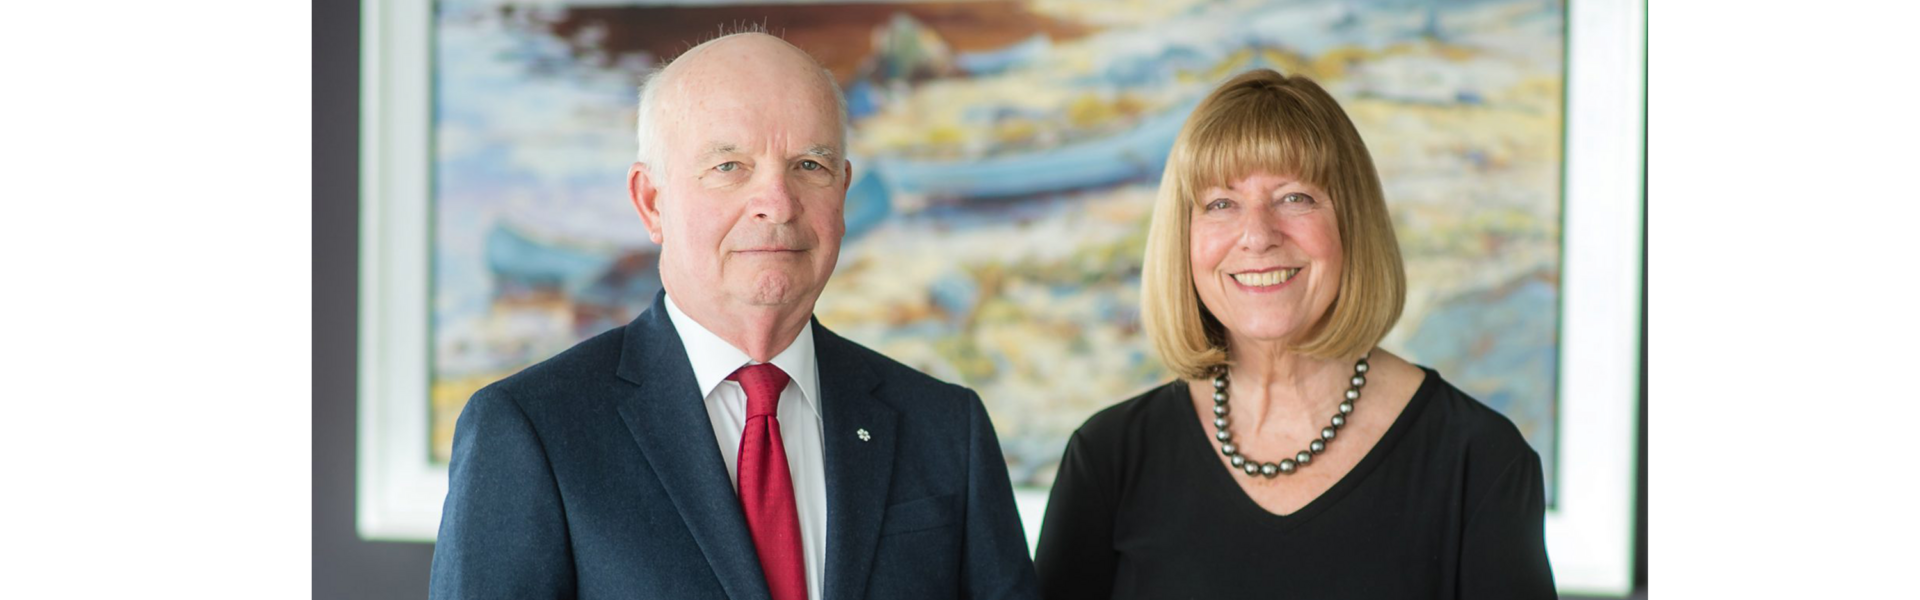 Tony and Anne Arrell smile for the camera while standing in a boardroom